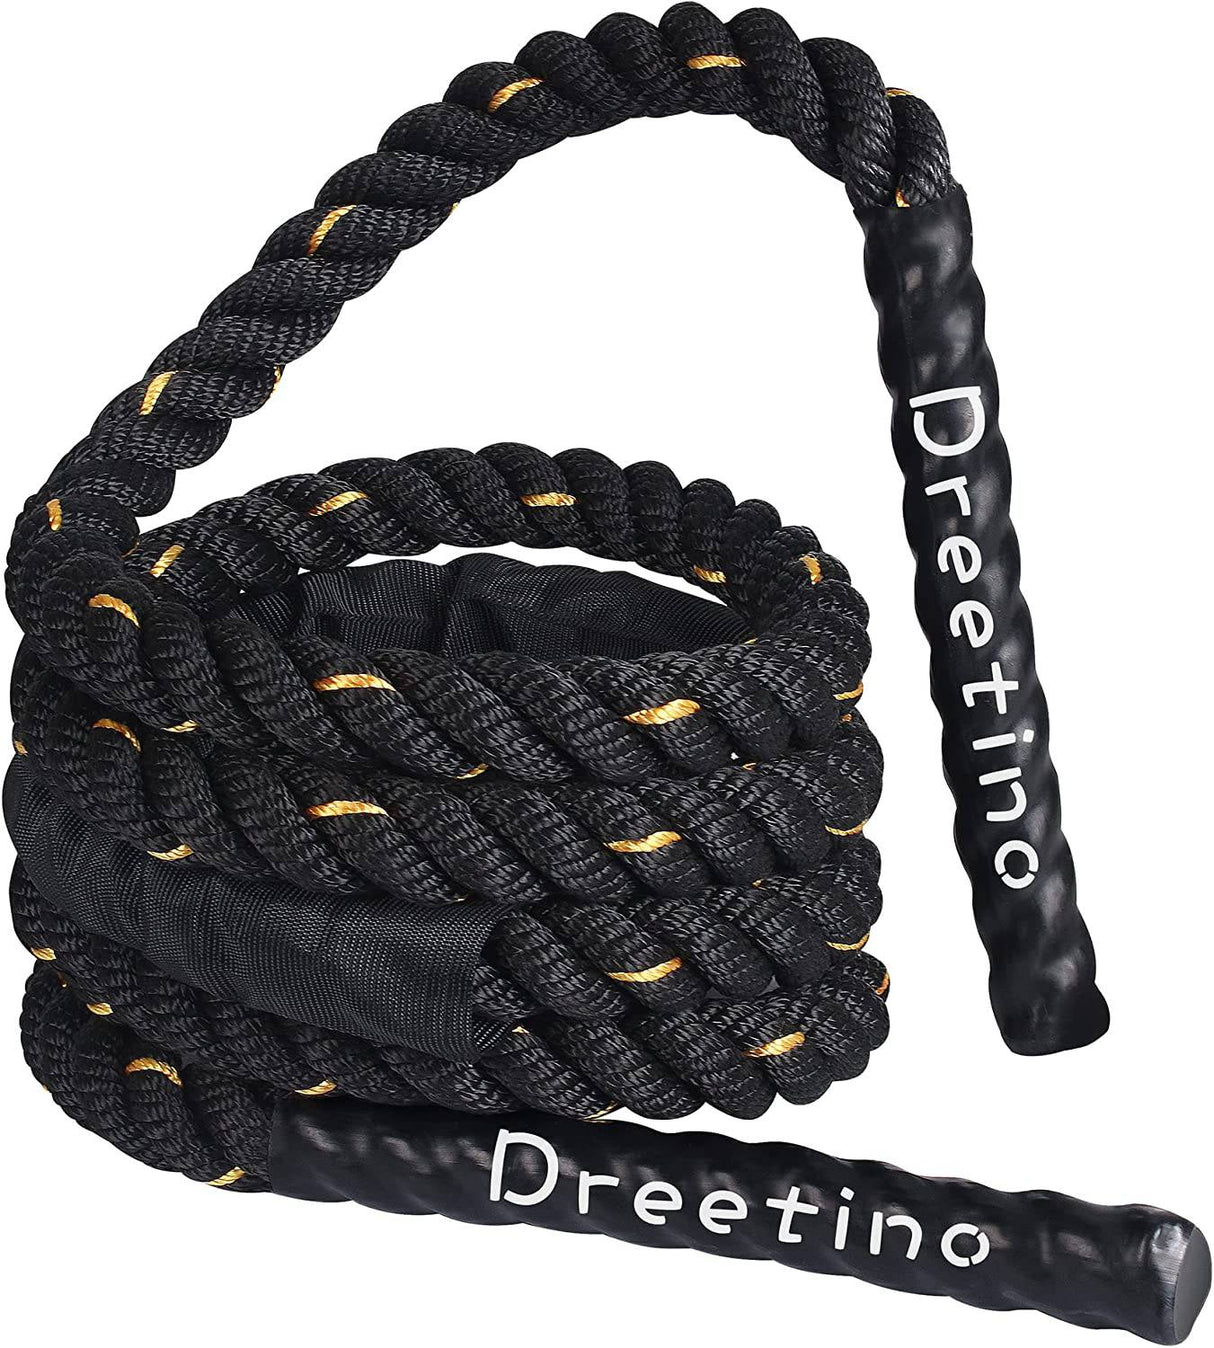 Dreetino - 2LB-10FT Heavy Durable Jump Rope Adult Fitness Weighted